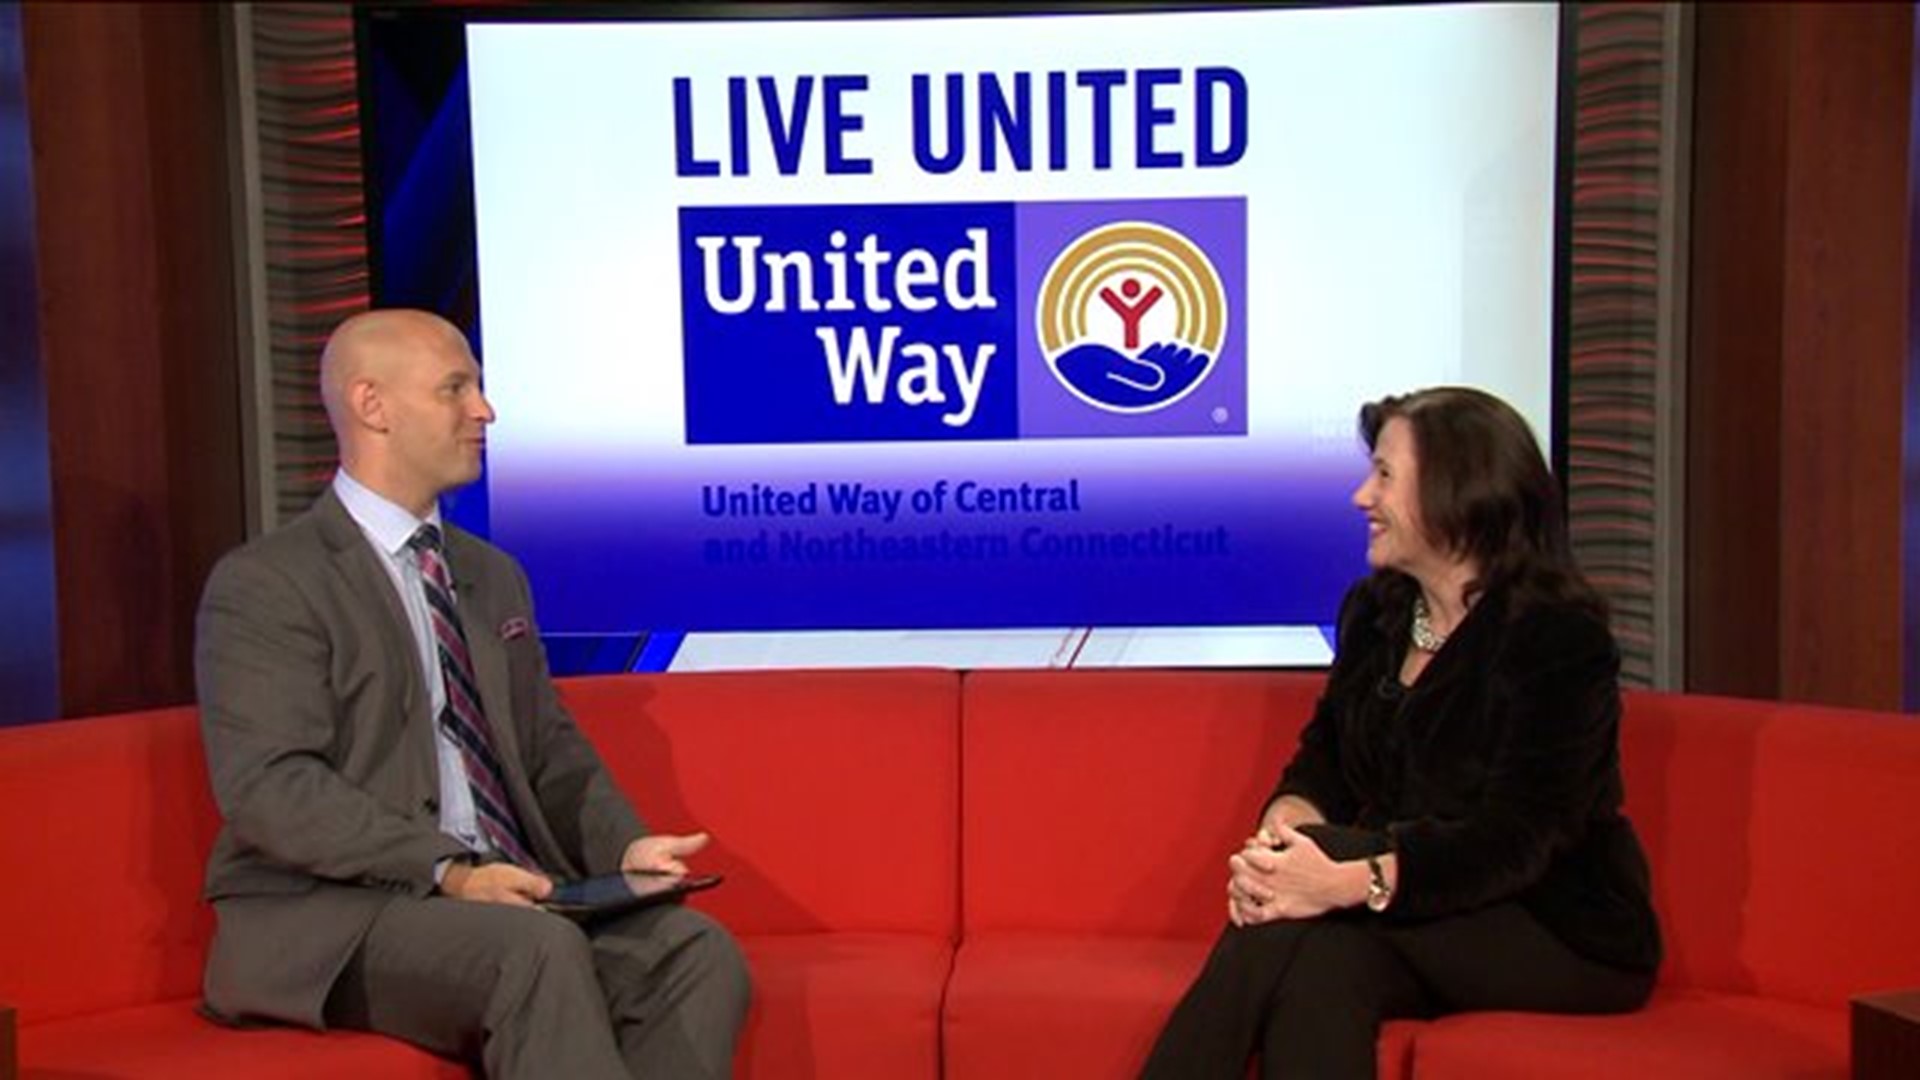 Giving to the United Way